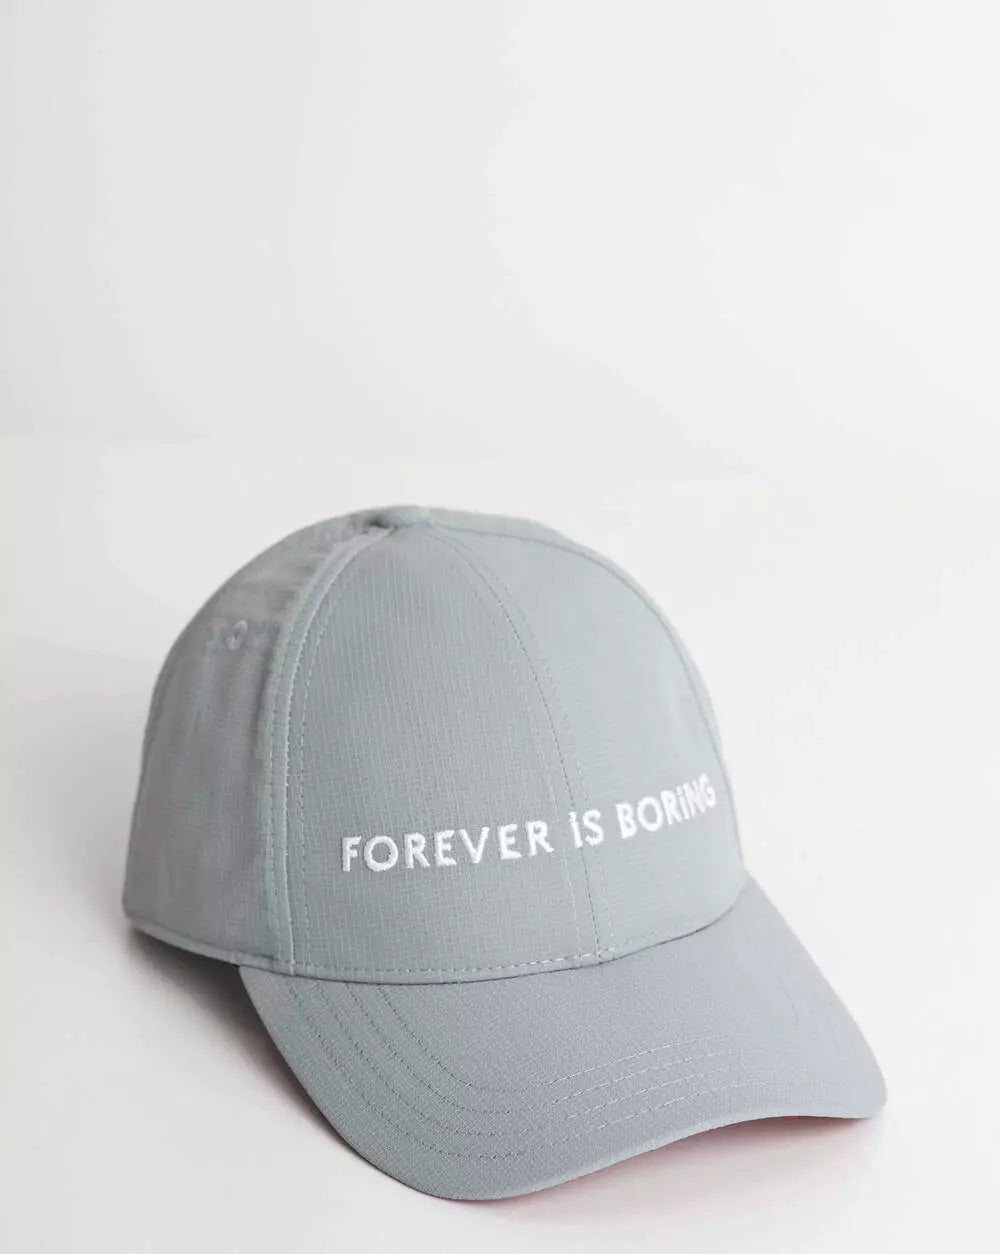 Cap FIB Grey Grid with FOREVER IS BORING embroidery in white on the front.